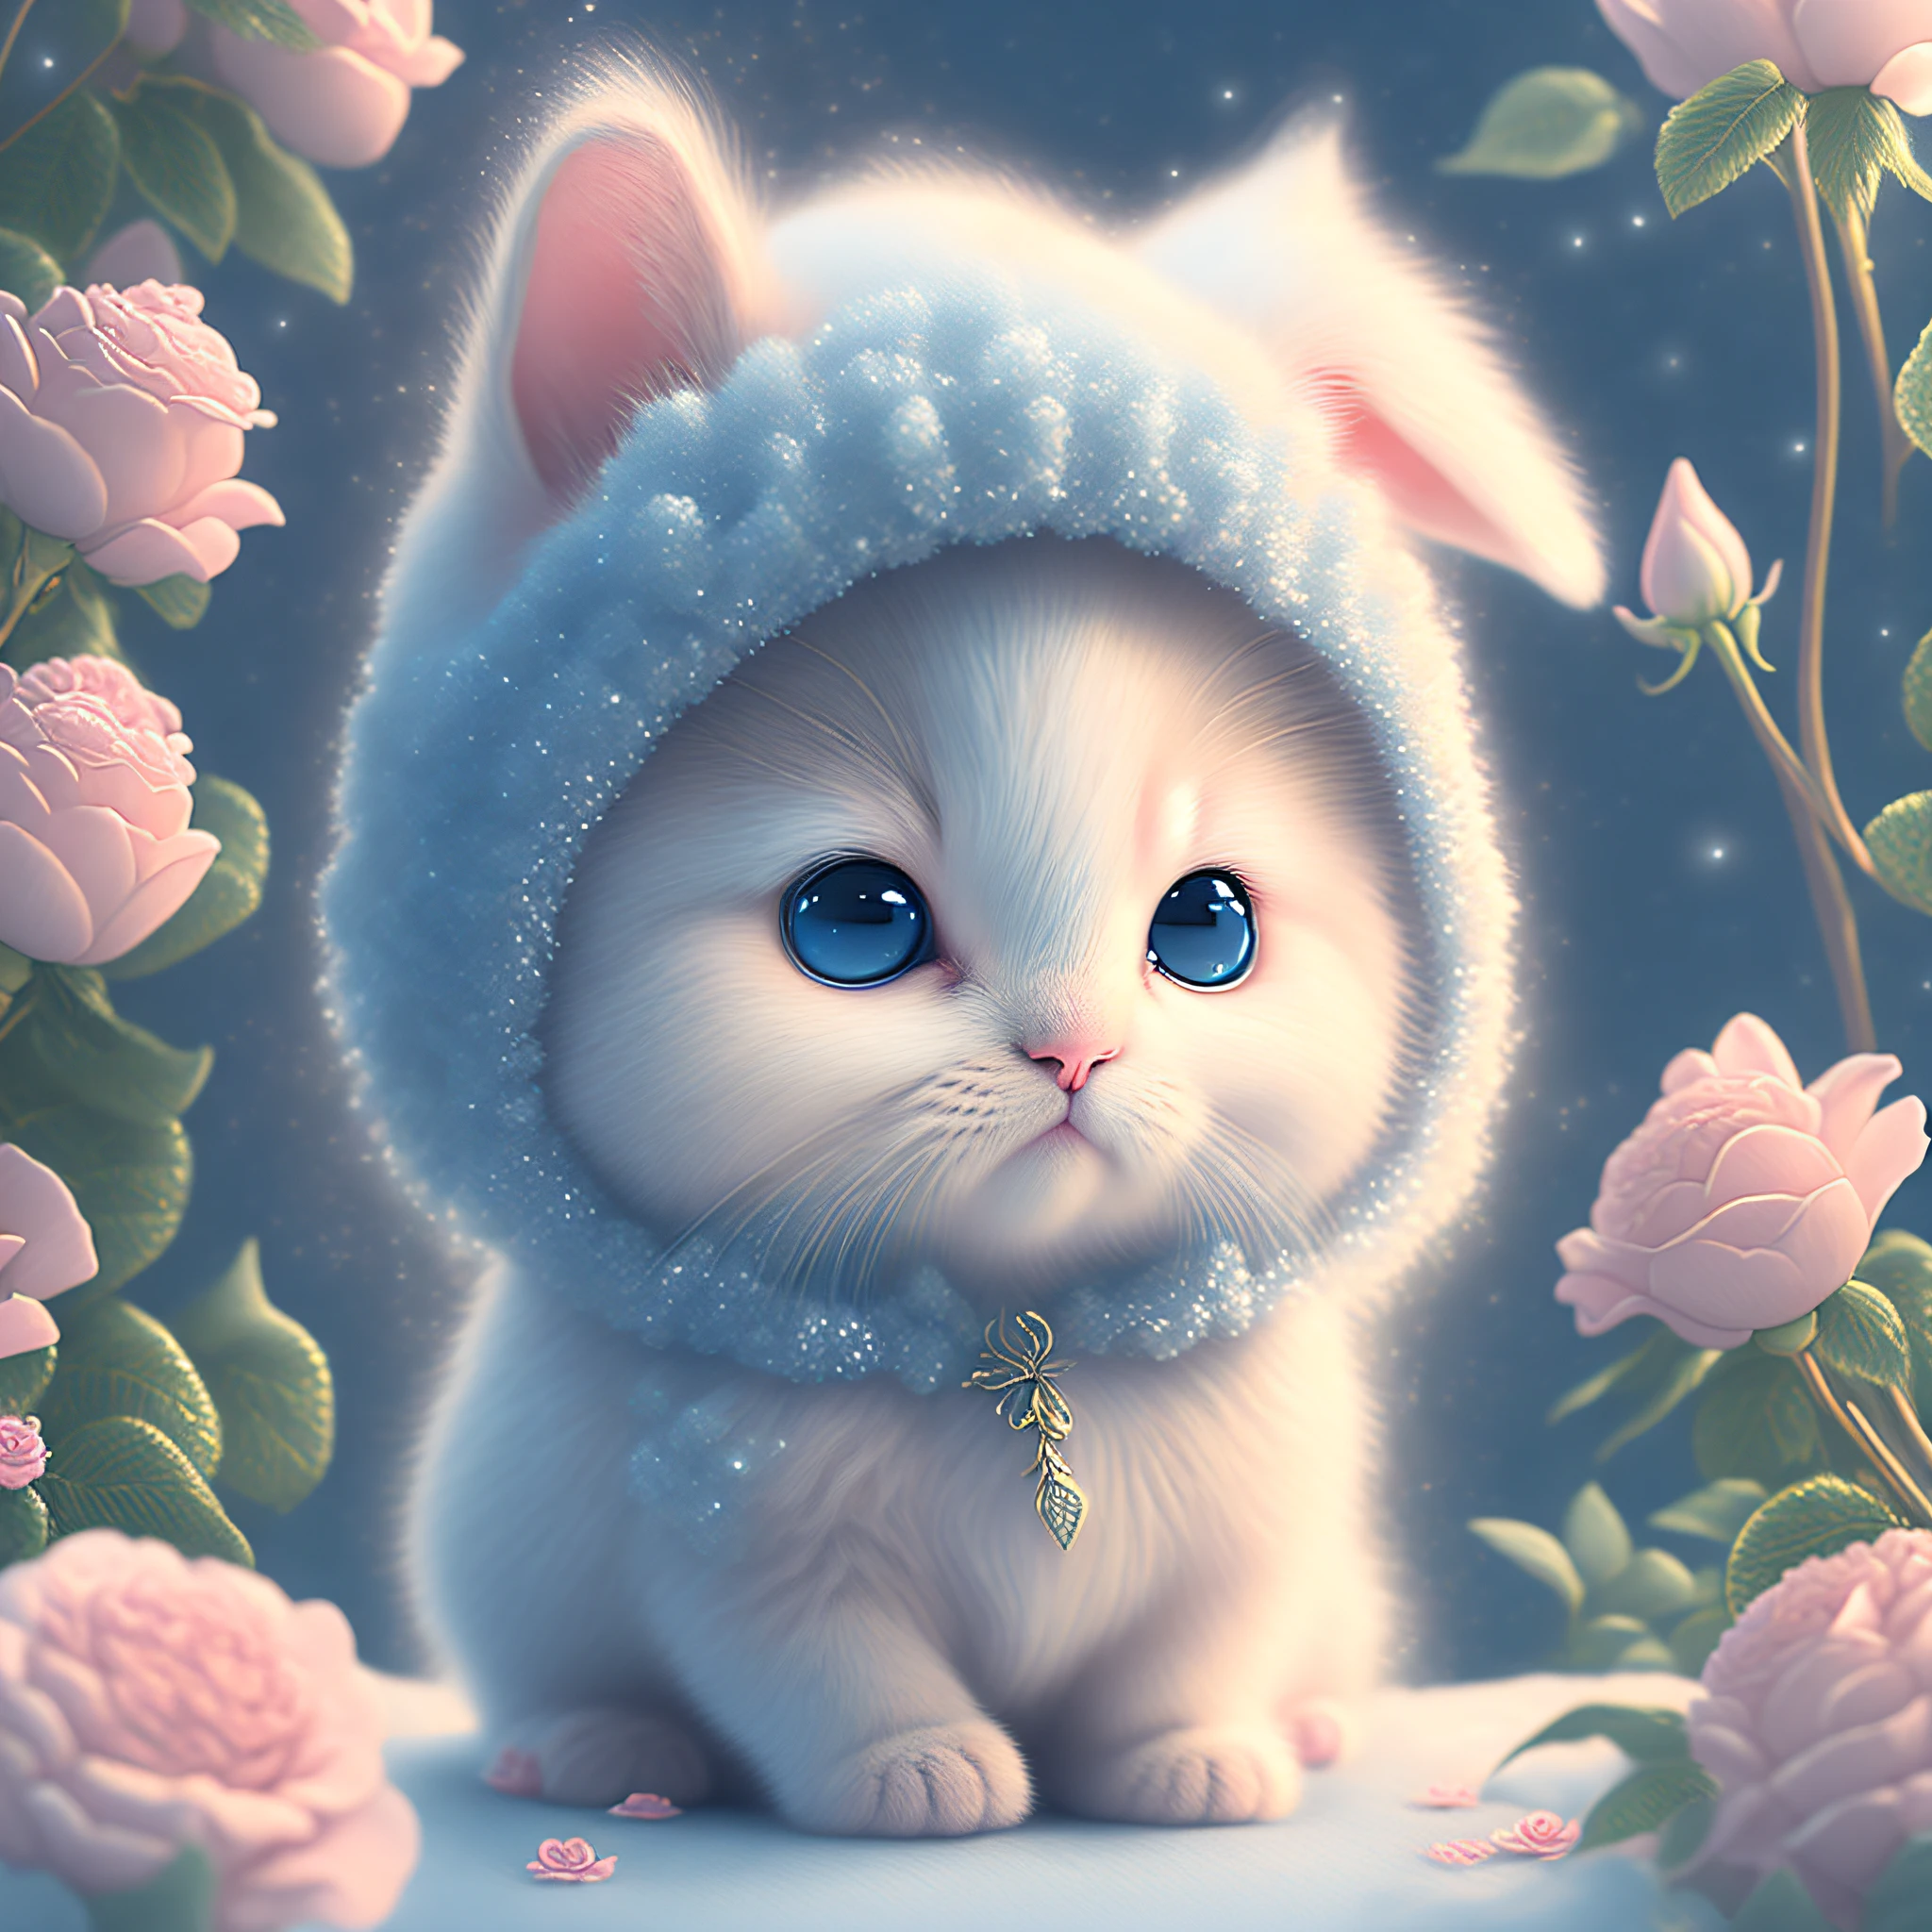 In this ultra-detailed CG art, the adorable kitten surrounded by ethereal roses, best quality, high resolution, intricate details, fantasy, cute animals, smile rabbit